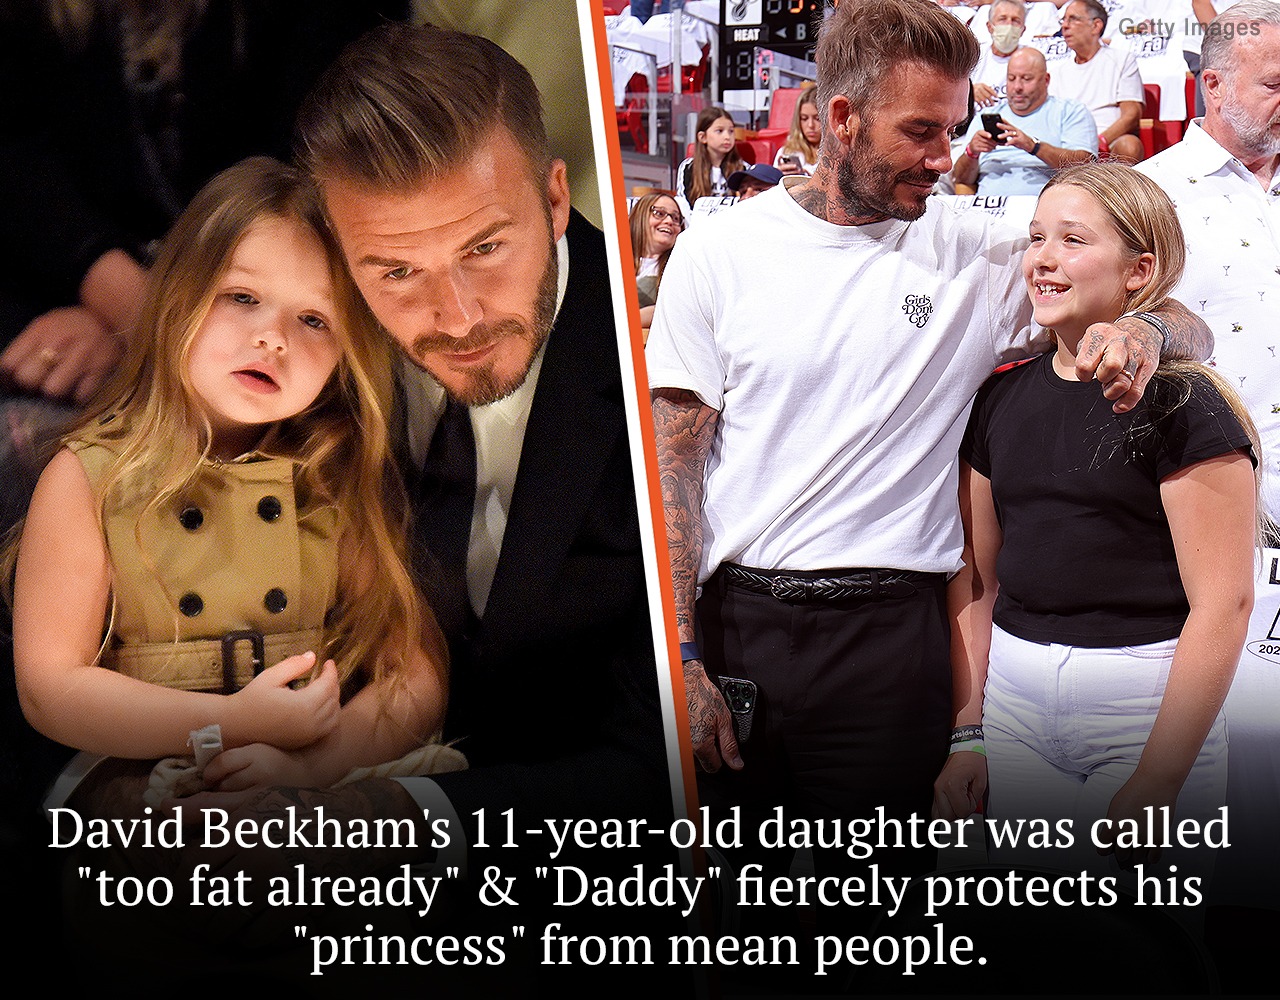 David Beckham’s daughter Harper is “at that age where her body is going to start changing,” and many parents of tweens can relate to his fears about the associated challenges.